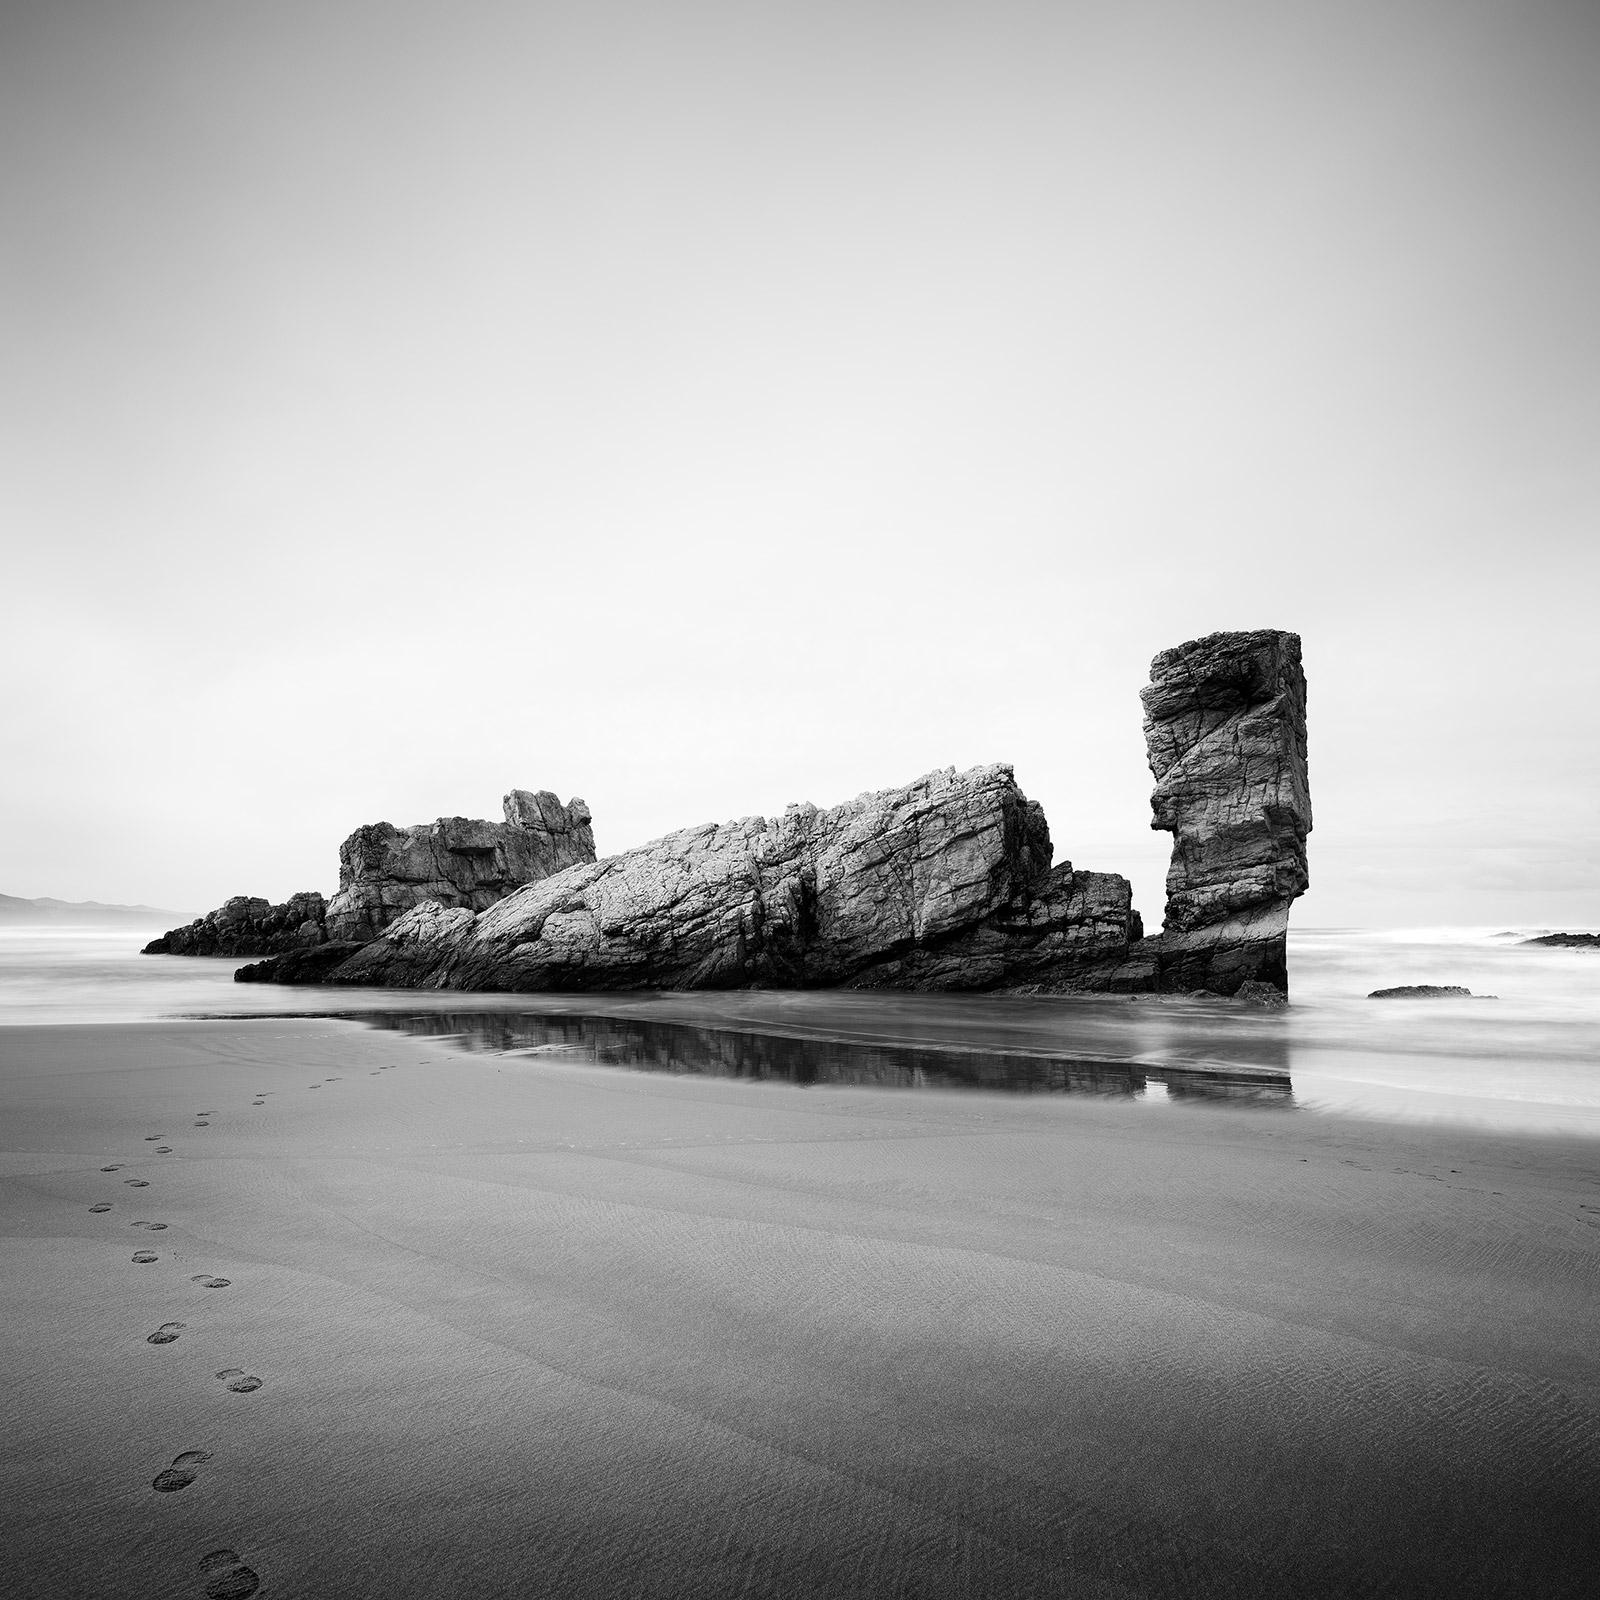 Gerald Berghammer Landscape Photograph - Bay of Biscay, giant rock, beach, Spain, black and white photography, landscape